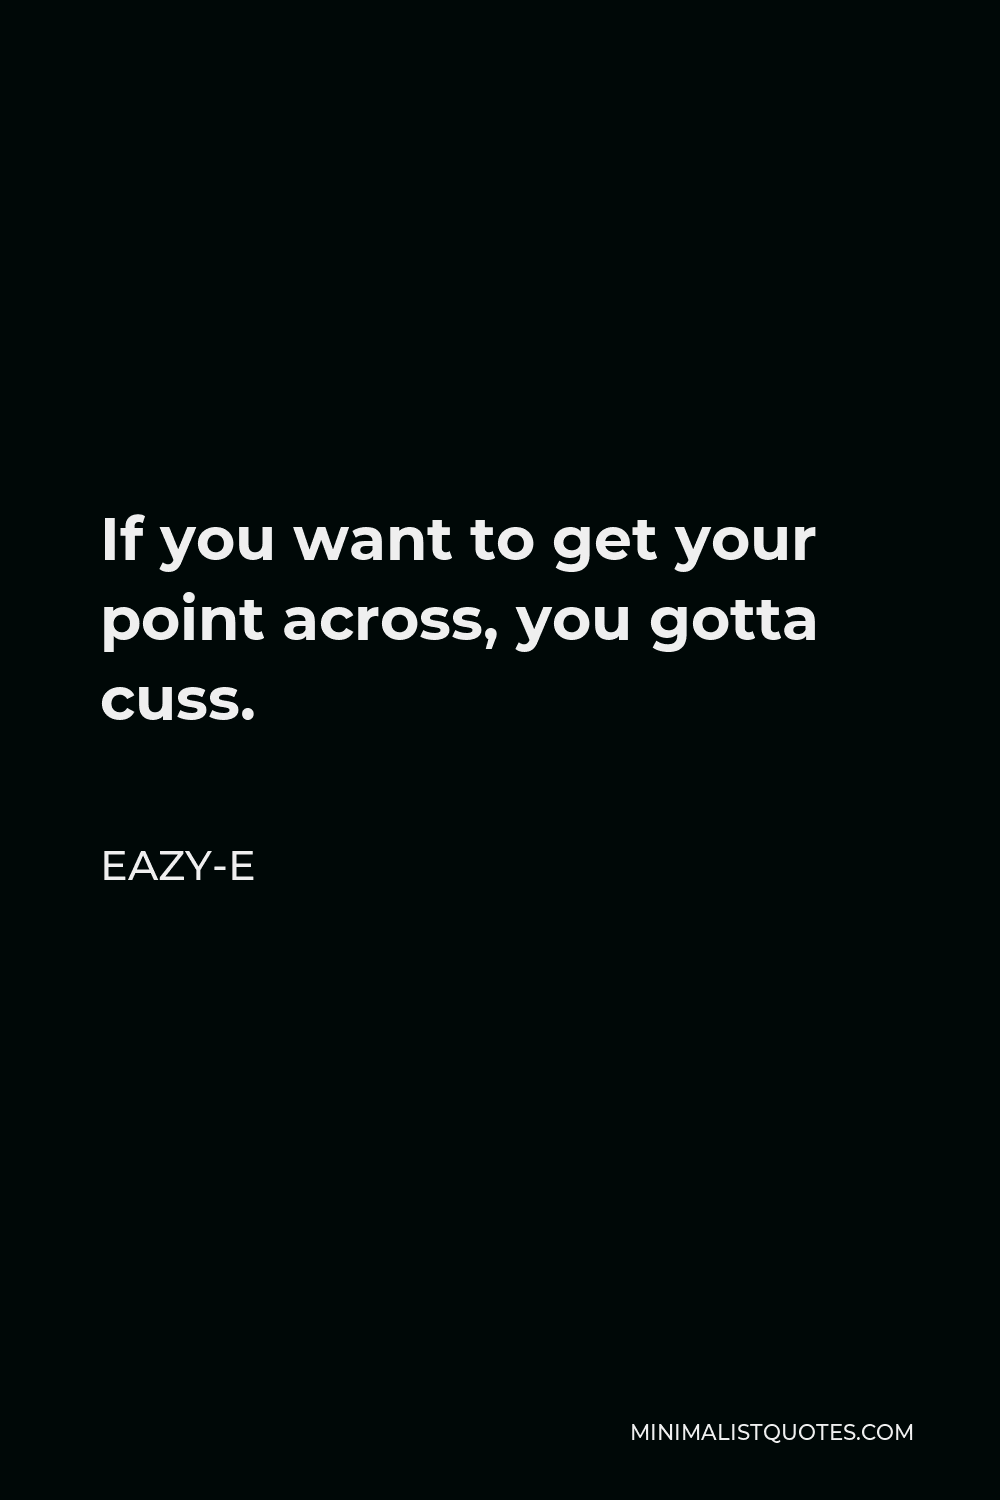 Eazy-E Quote - If you want to get your point across, you gotta cuss.